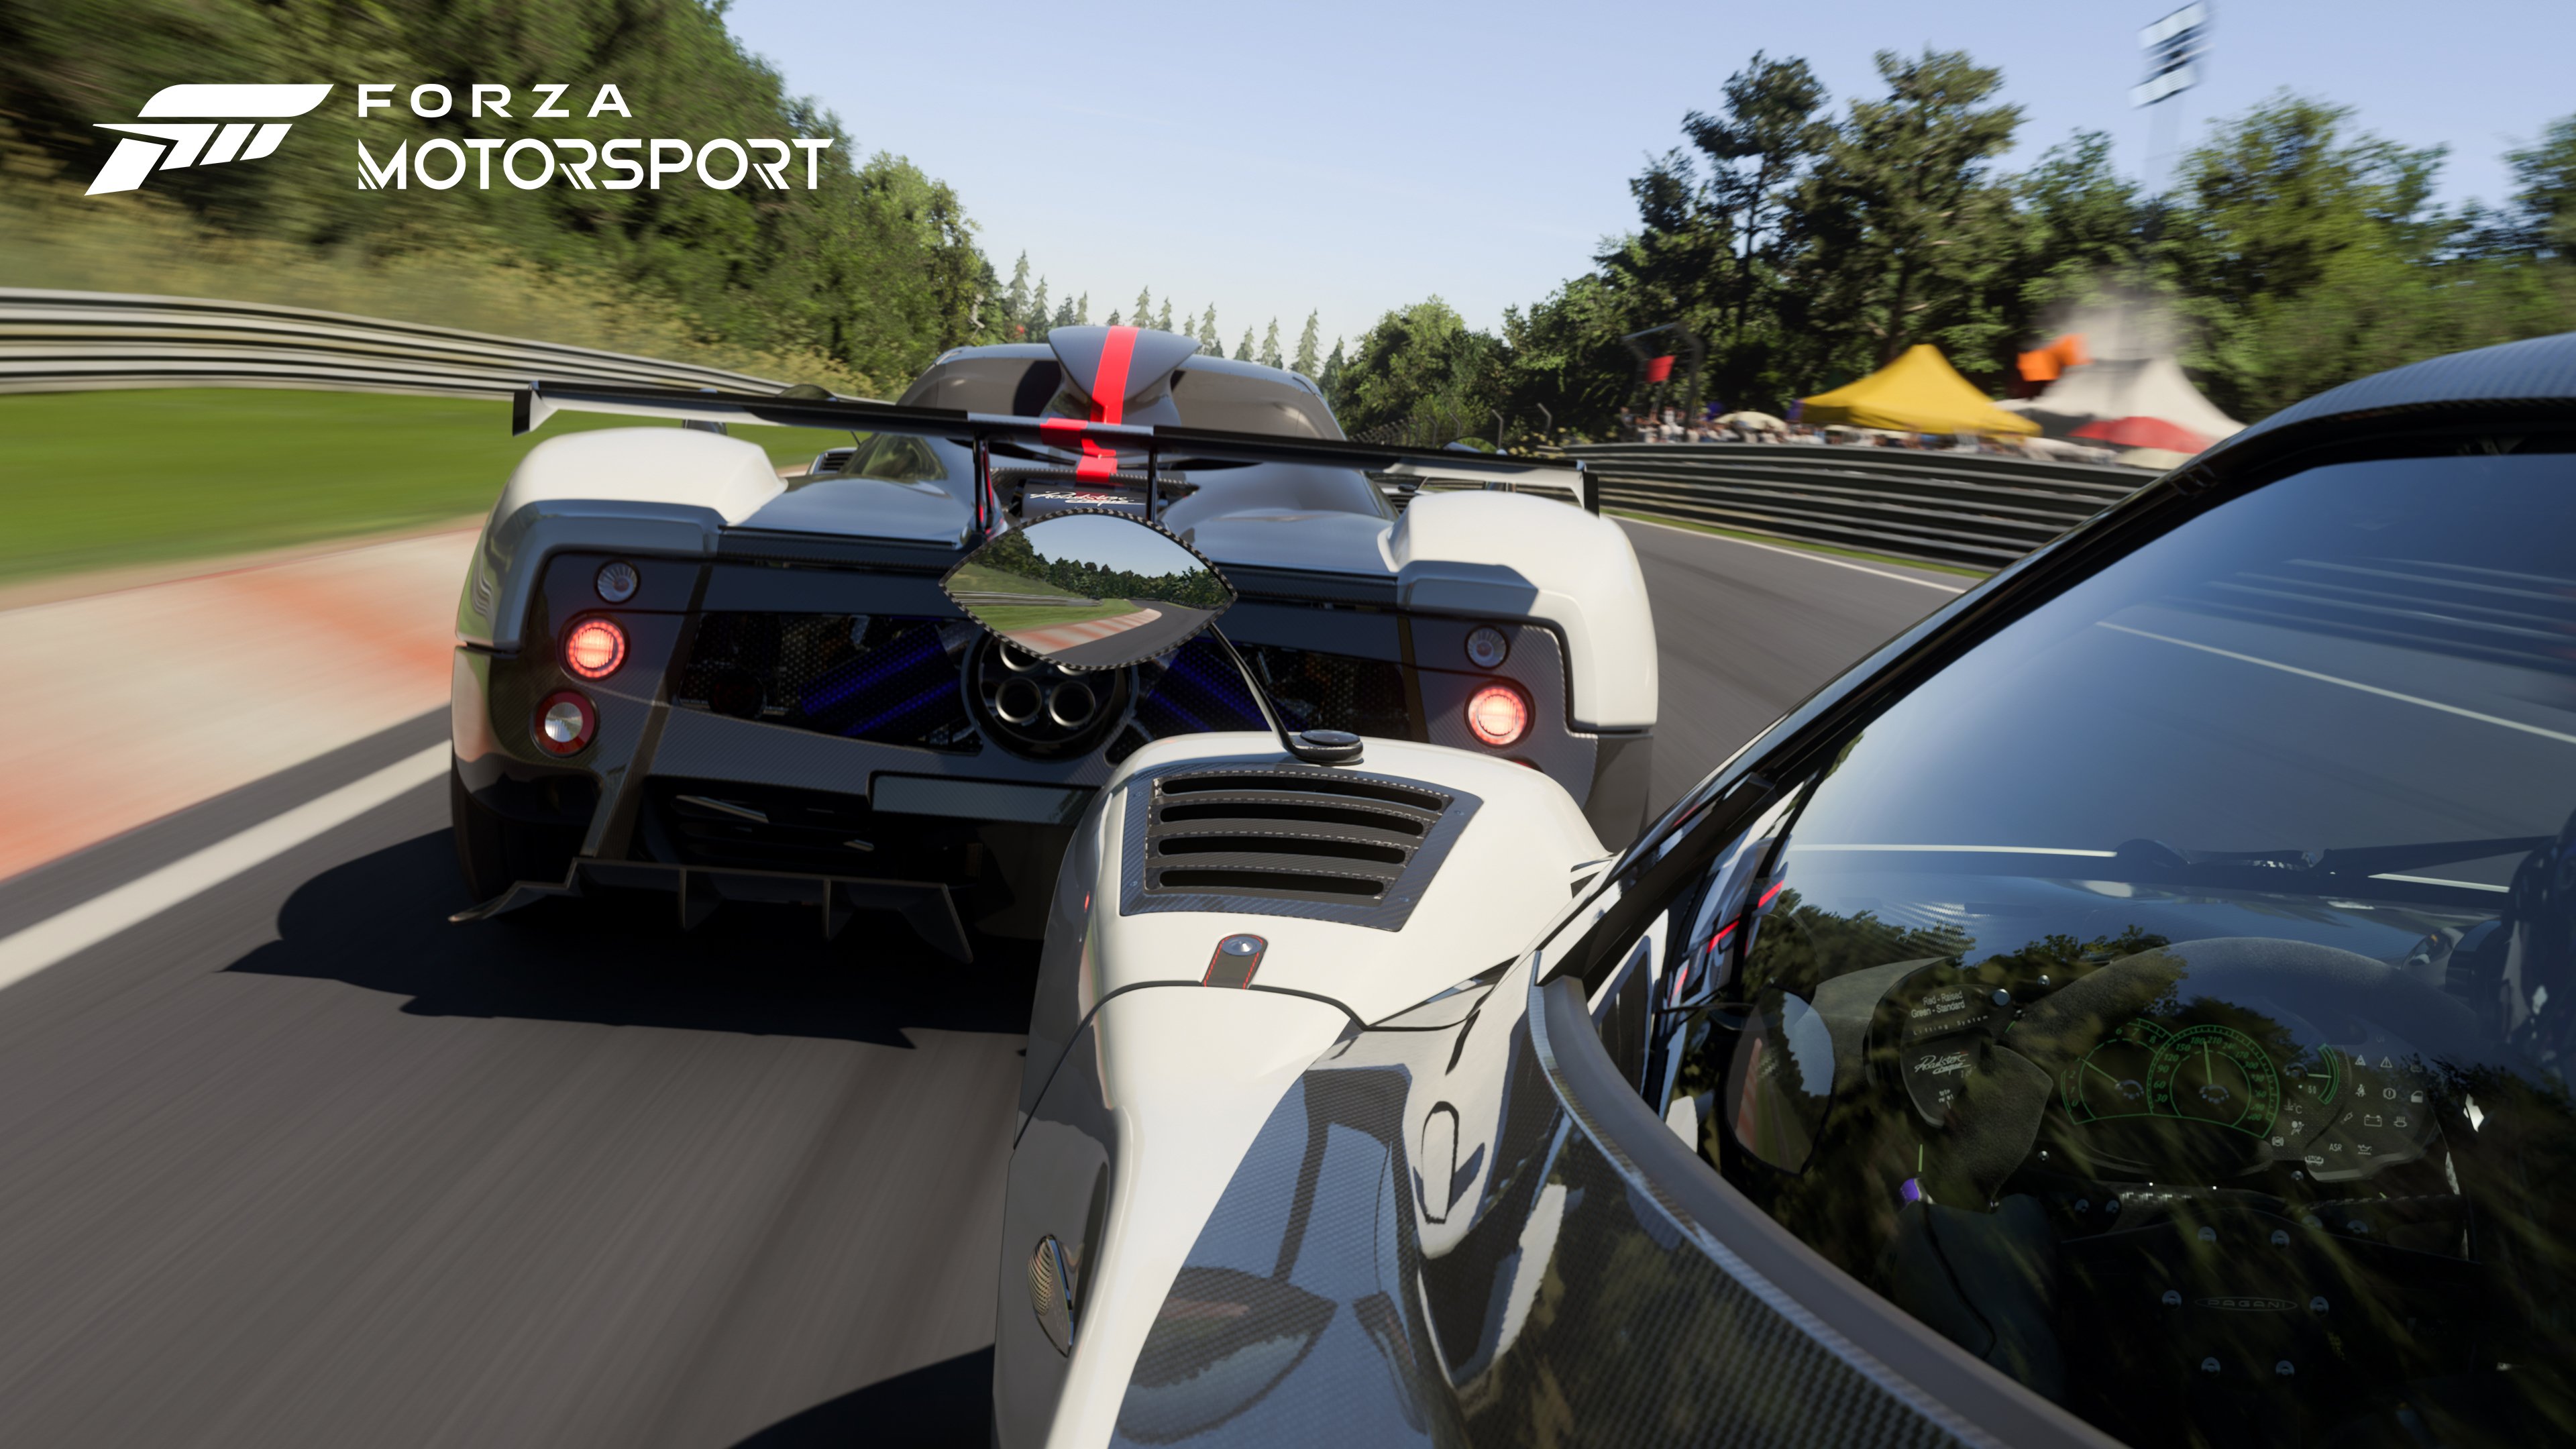 More information about "Arriva l'update 6 di Forza Motorsport"